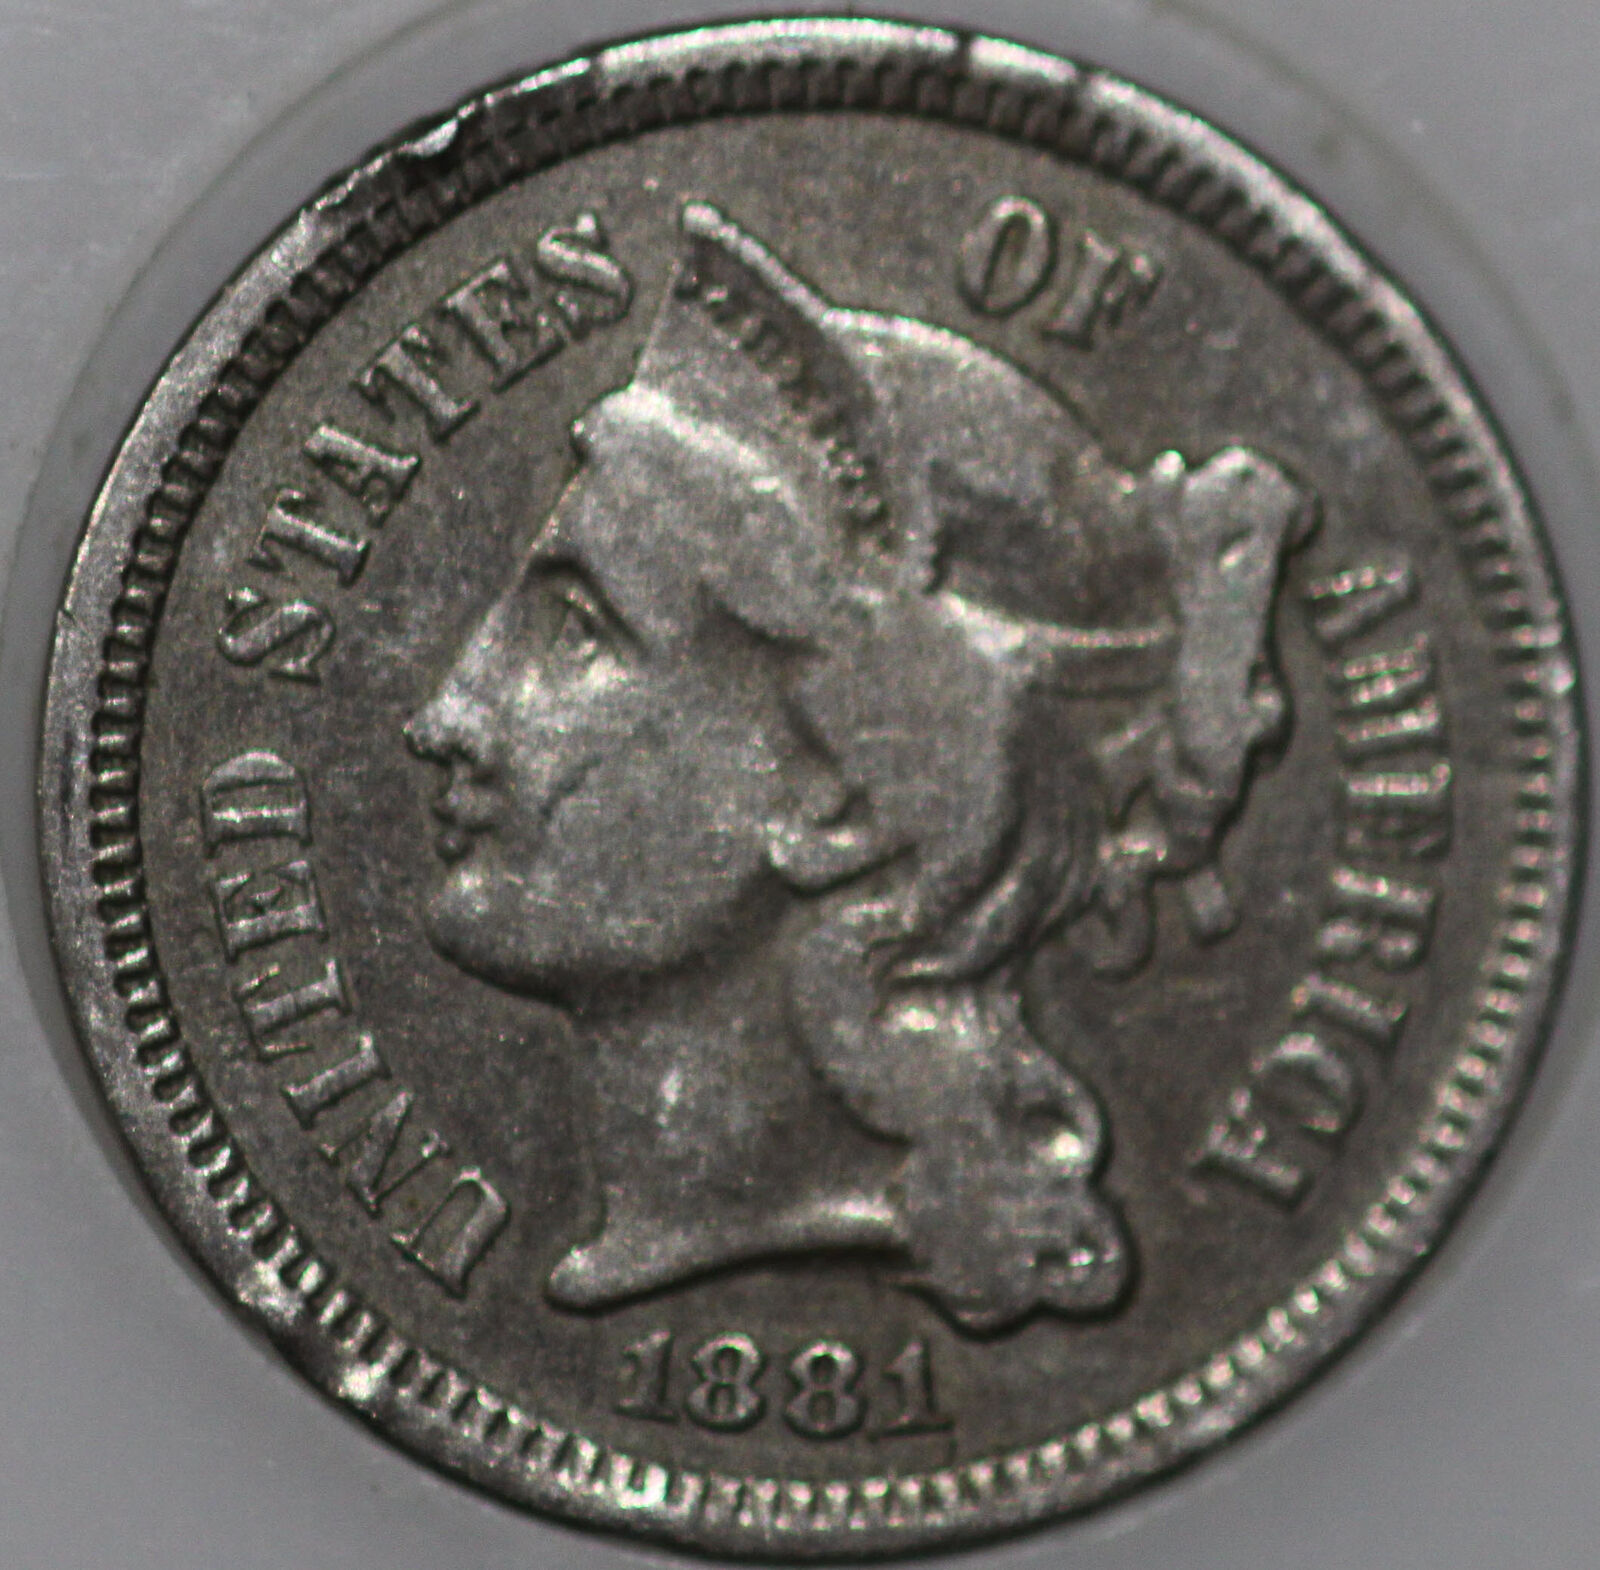 1881-p Three Cent Piece Over 100 Years Old. You'll Receive The Coin Shown [sn01]